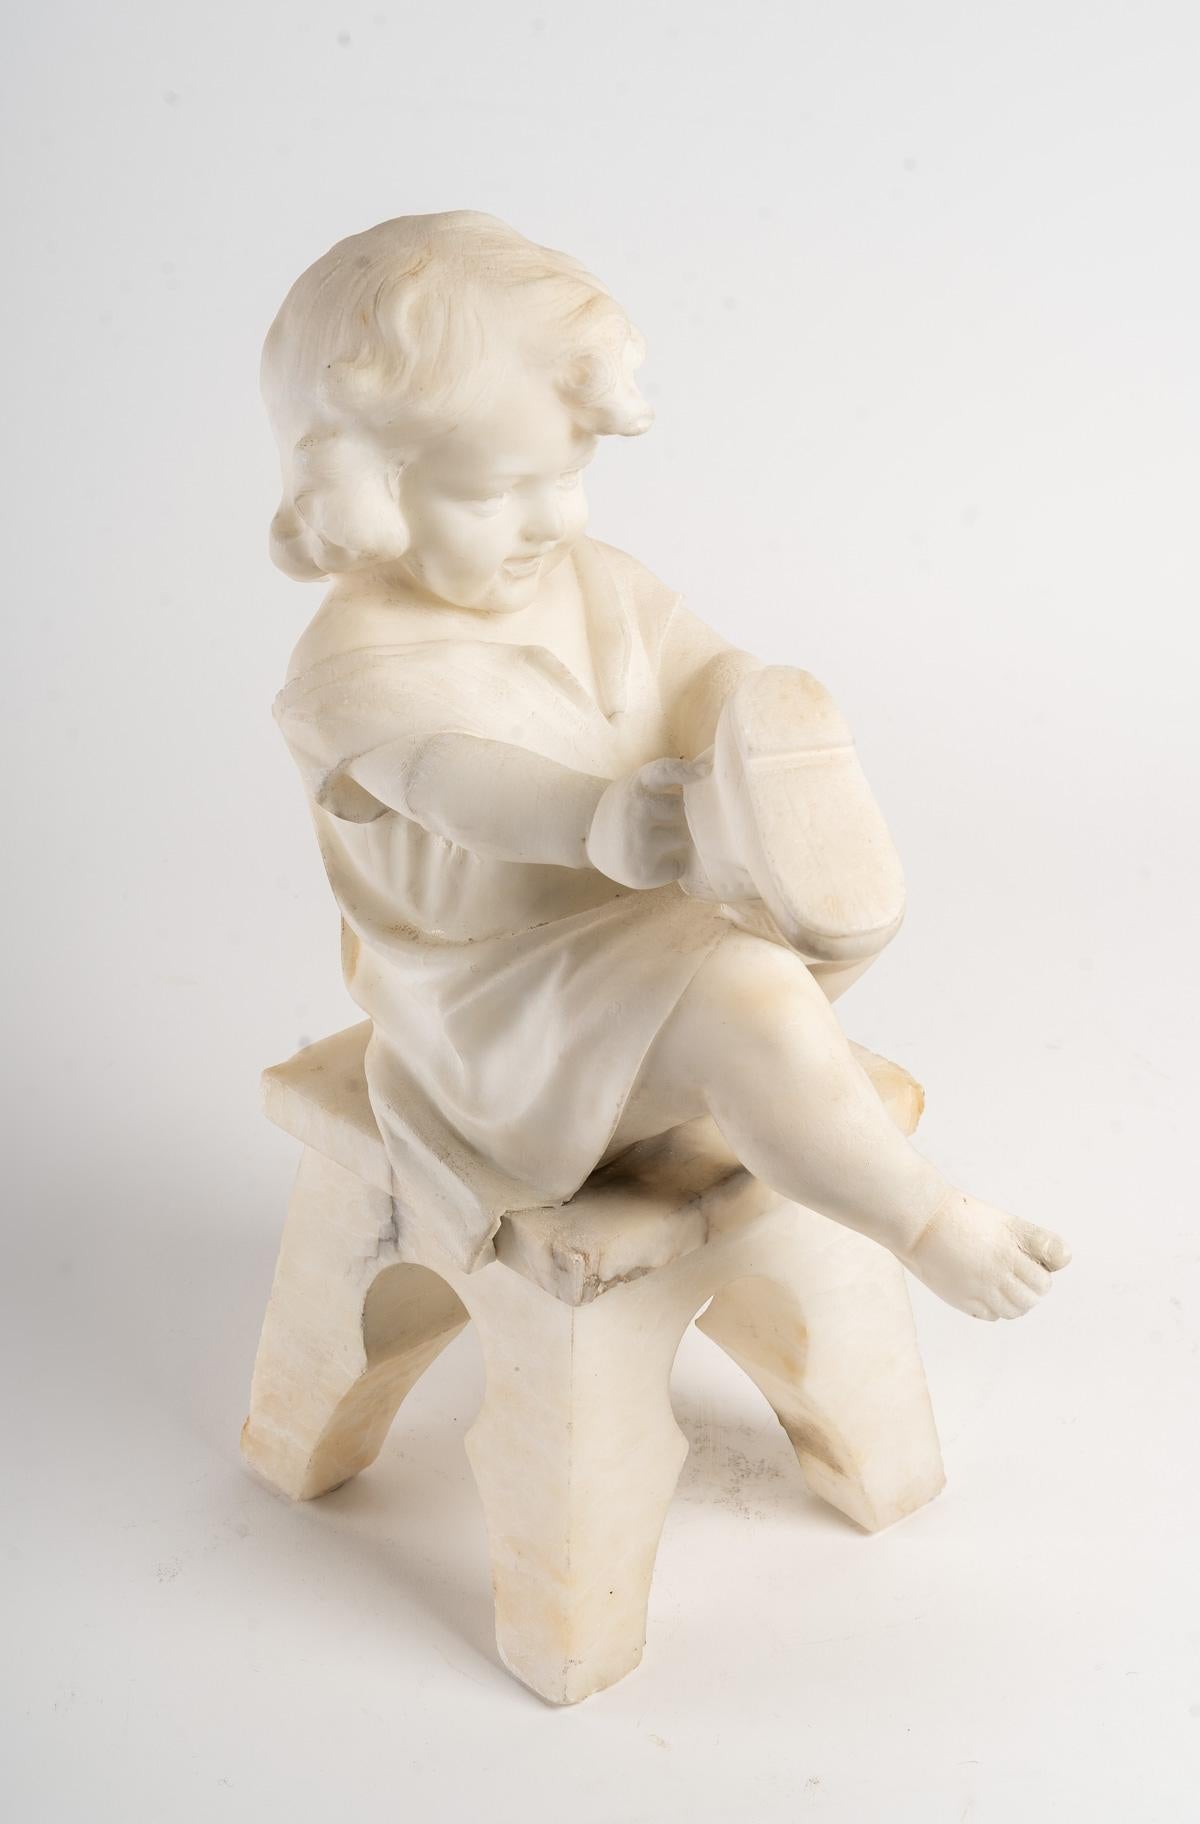 Statue in alabaster representing a little girl sitting on a stool and playing with shoes.
Art Nouveau period.
In good condition.
Measures: Height 40 cm, width 16cm, depth 24 cm.